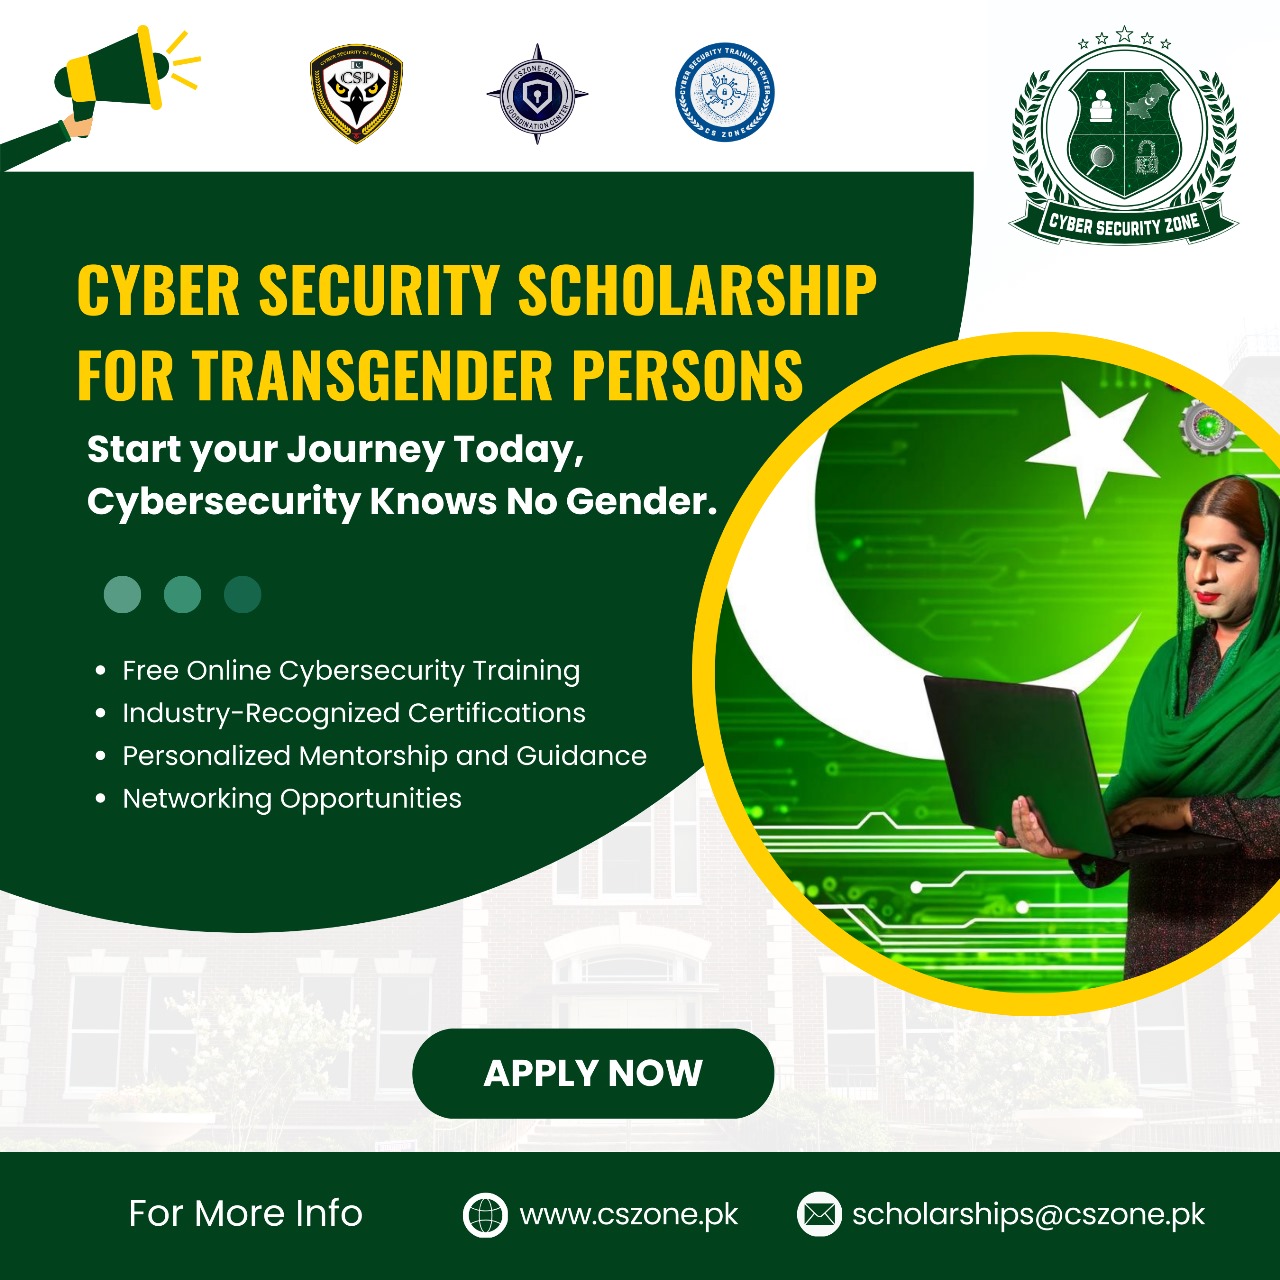 Cybersecurity Scholarship for Transgender Persons